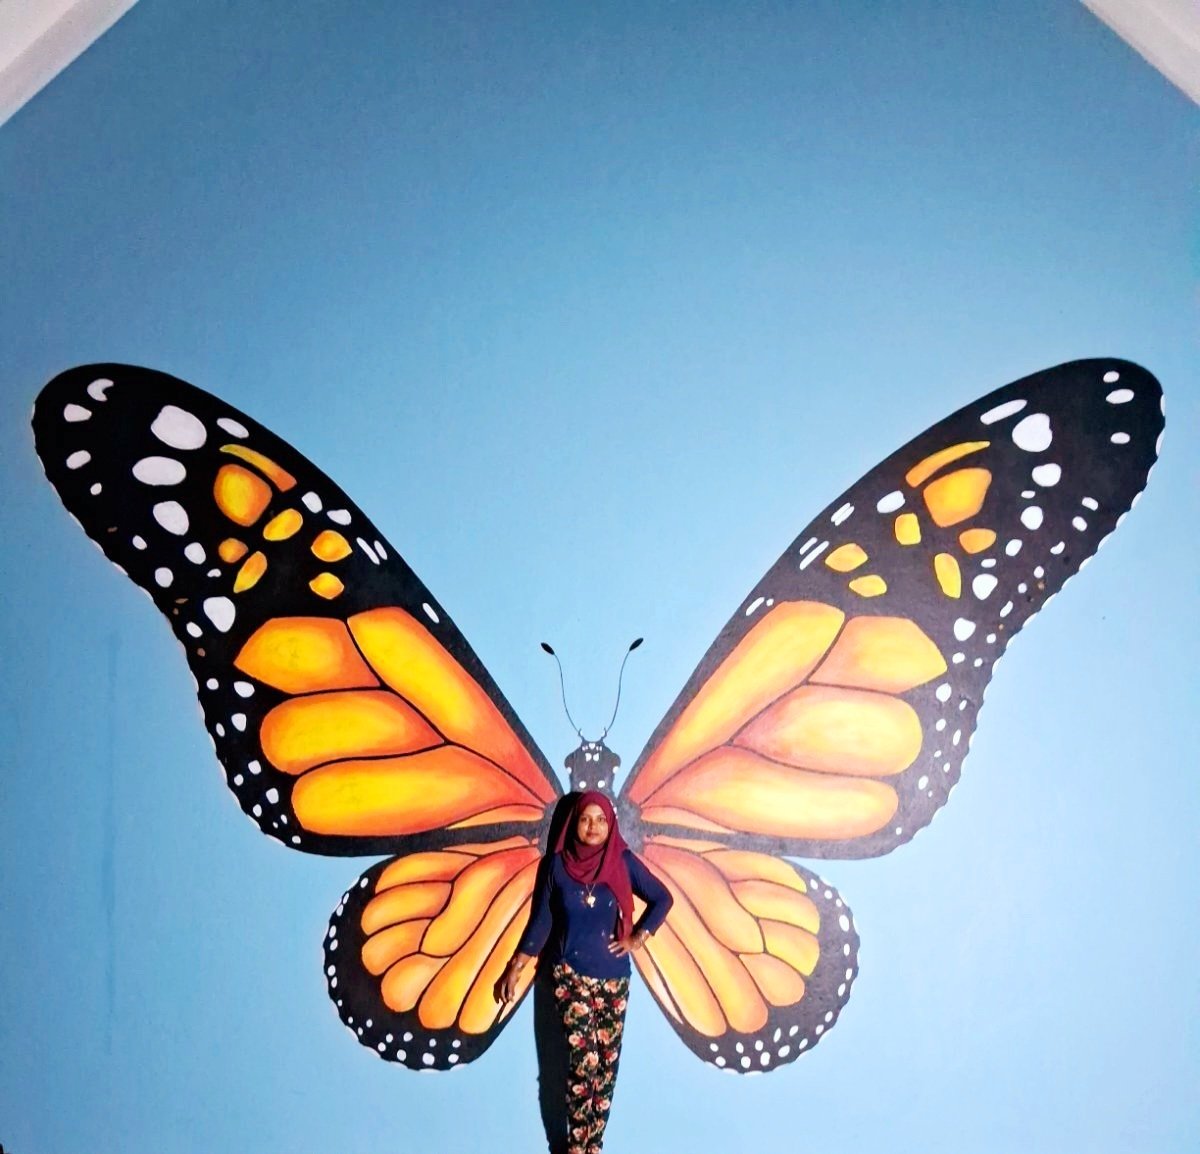 'I kept going because I had no other choice. It was either fall or fly, and that's the story of how I got my wings' Samantha Gabardi

Wall painting at Ifuru Island Resort 
'Monarch Butterfly'
Acrylic Emulsion on Wall
18x20ft
#myart #wallpainting #wallmurals #butterflies